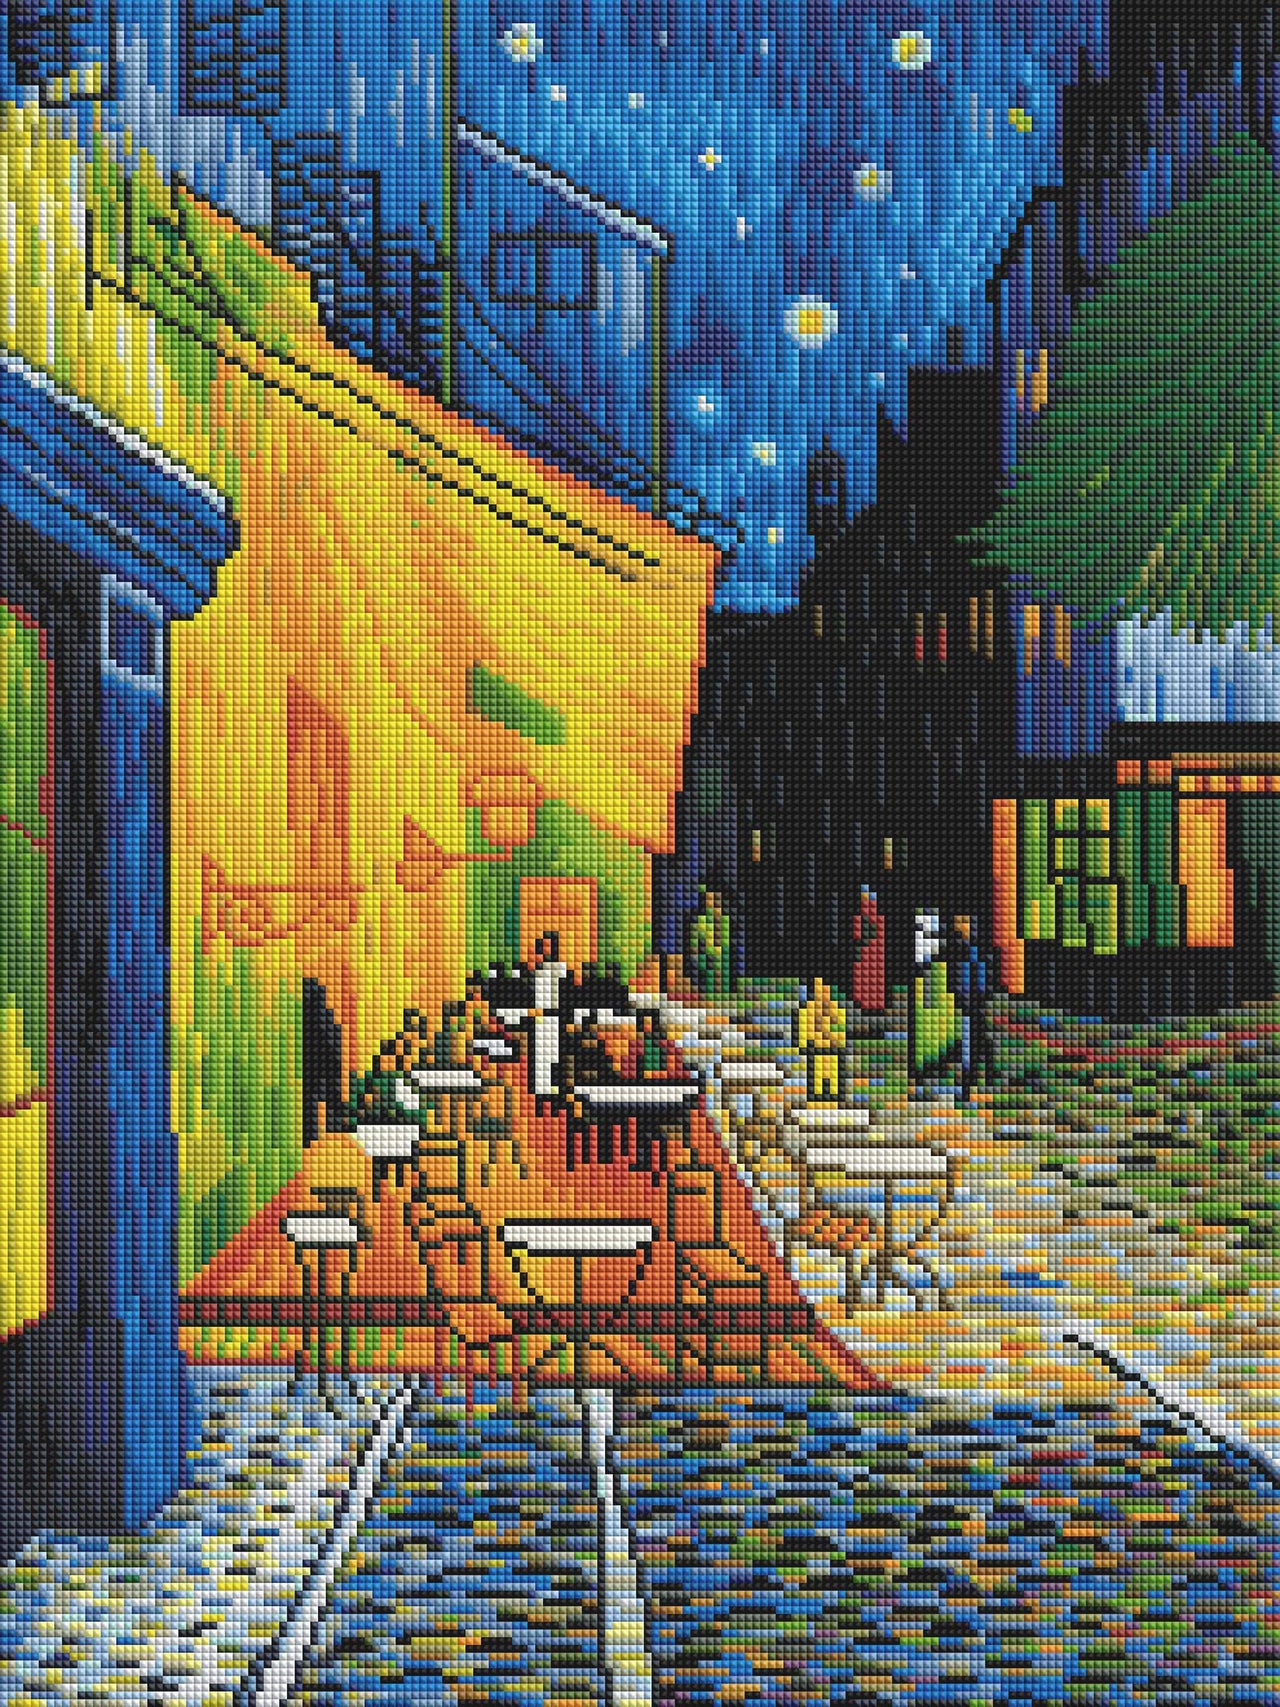 Diamond Painting Café Terrace at Night 16.5" x 22.4″ (42cm x 56cm) / Square With 41 Colors Including 3 ABs / 36,800